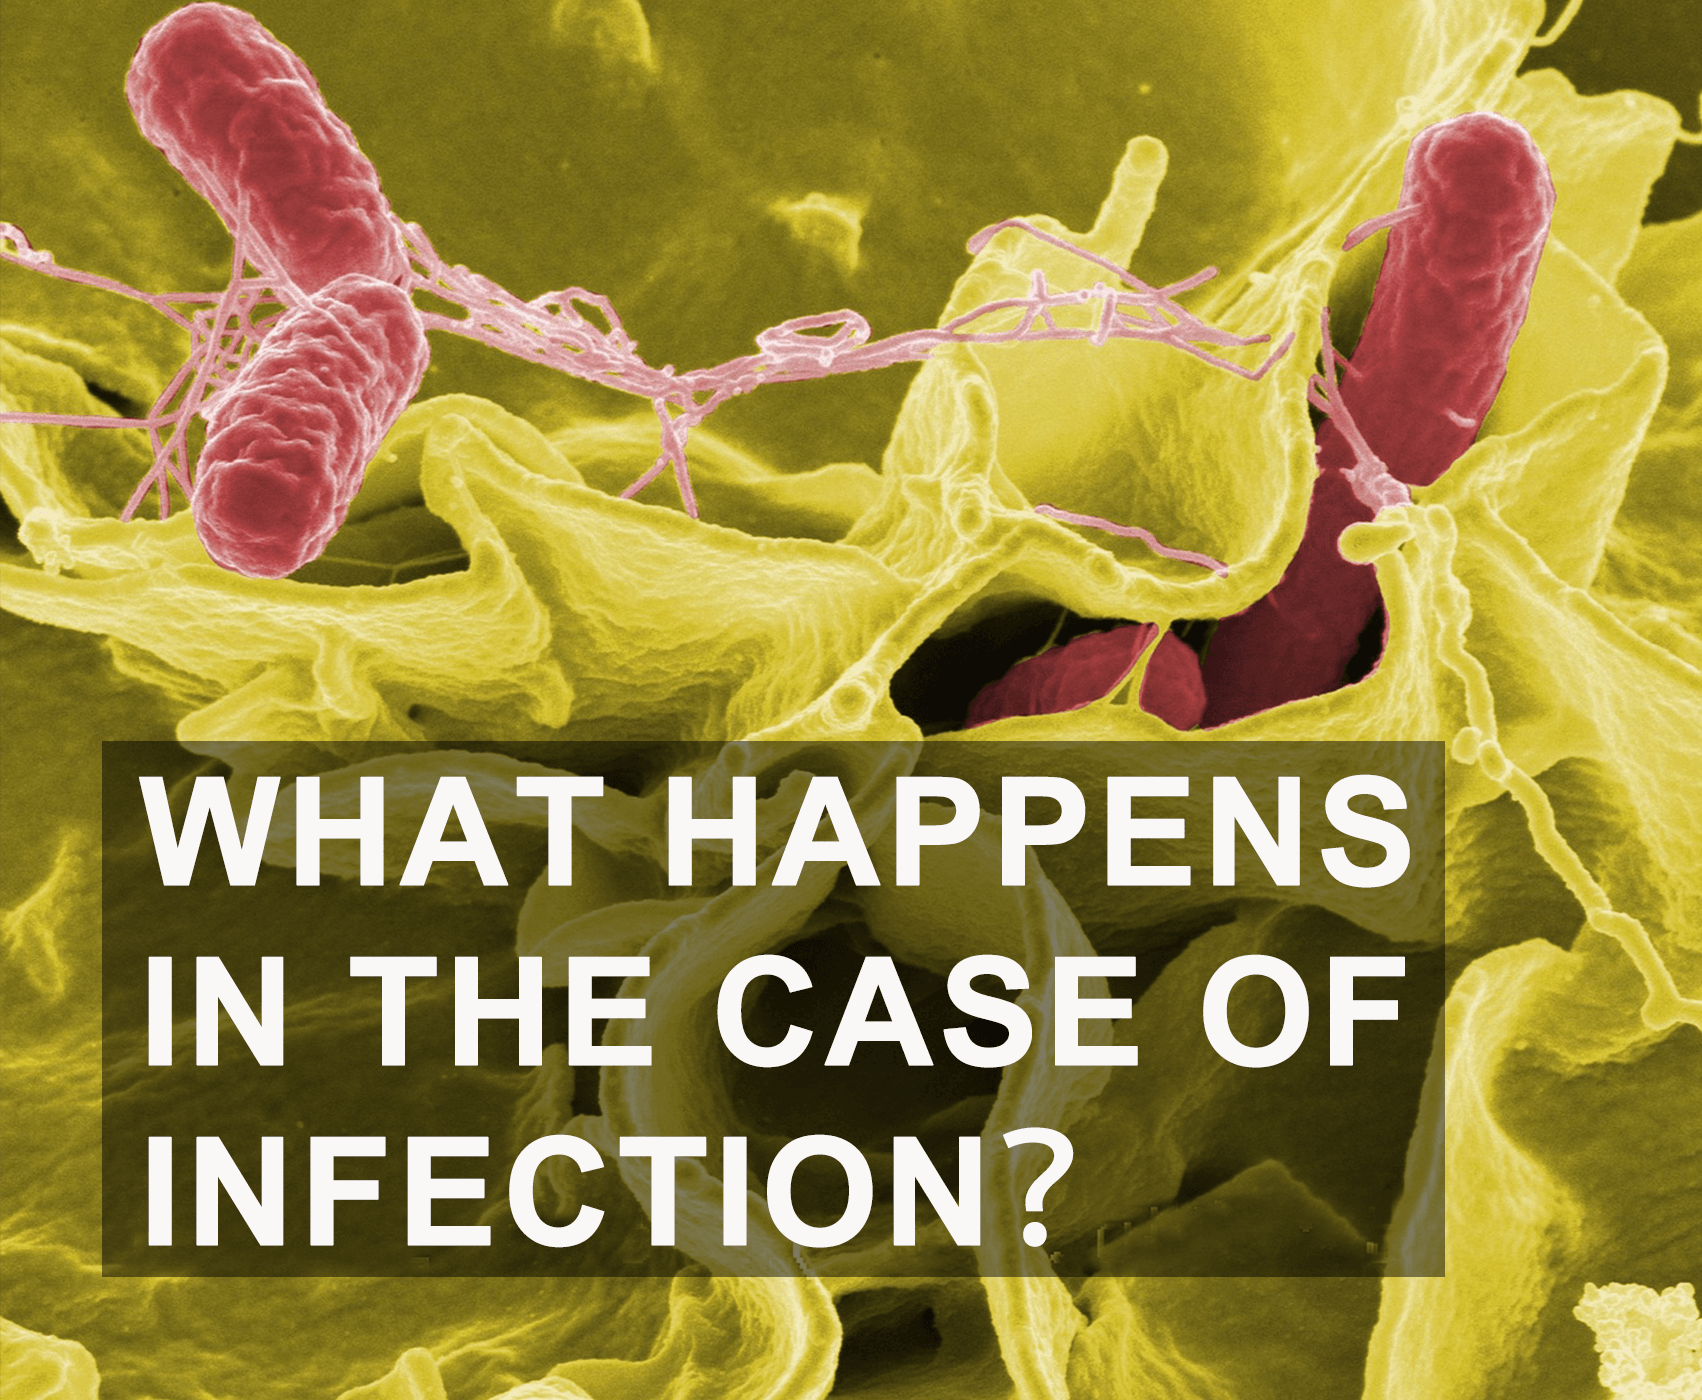 What Happens in the Case of Infection？